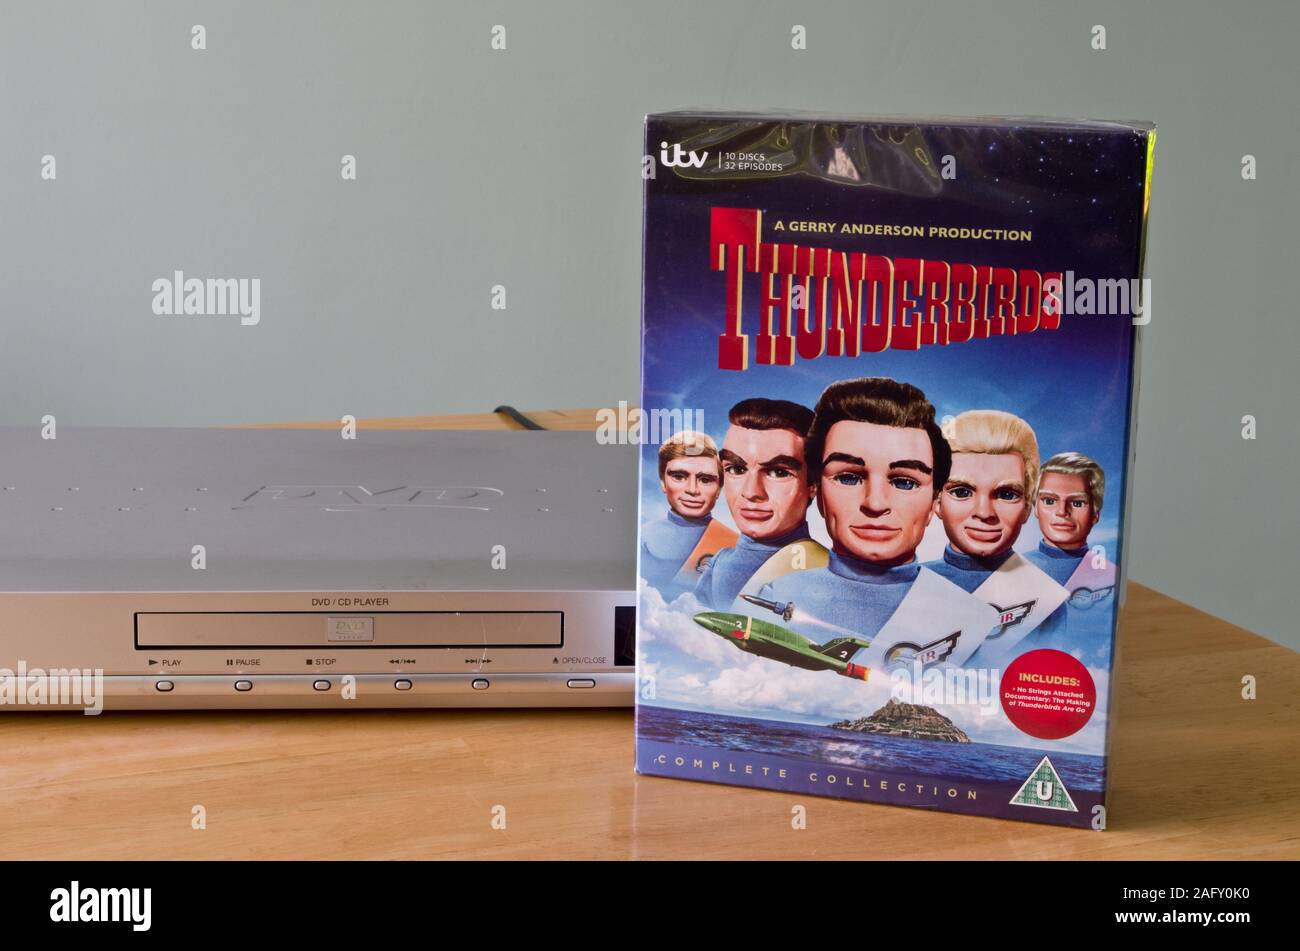 Thunderbirds Complete Collection DVD Box Set, a Gerry Anderson Production With DVD Player, UK Stock Photo